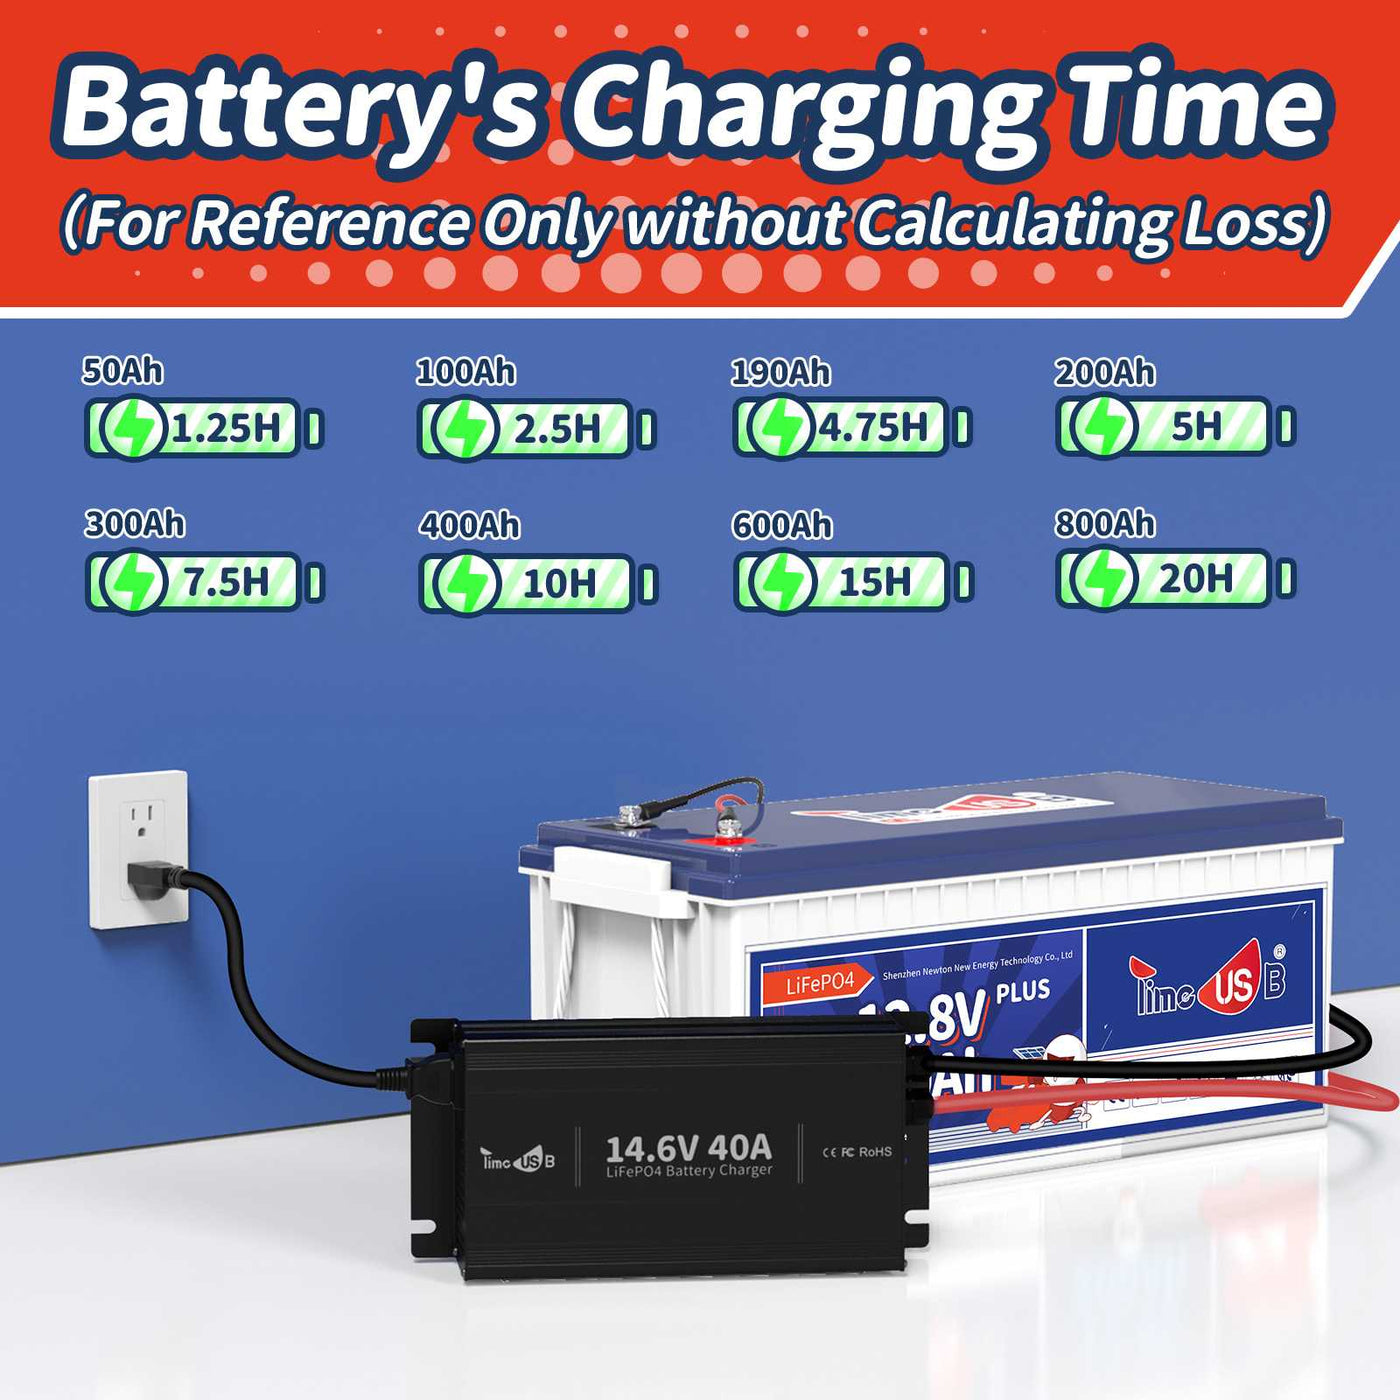 Timeusb 14.6V 40A Fast Charging LiFePO4 Battery Charger